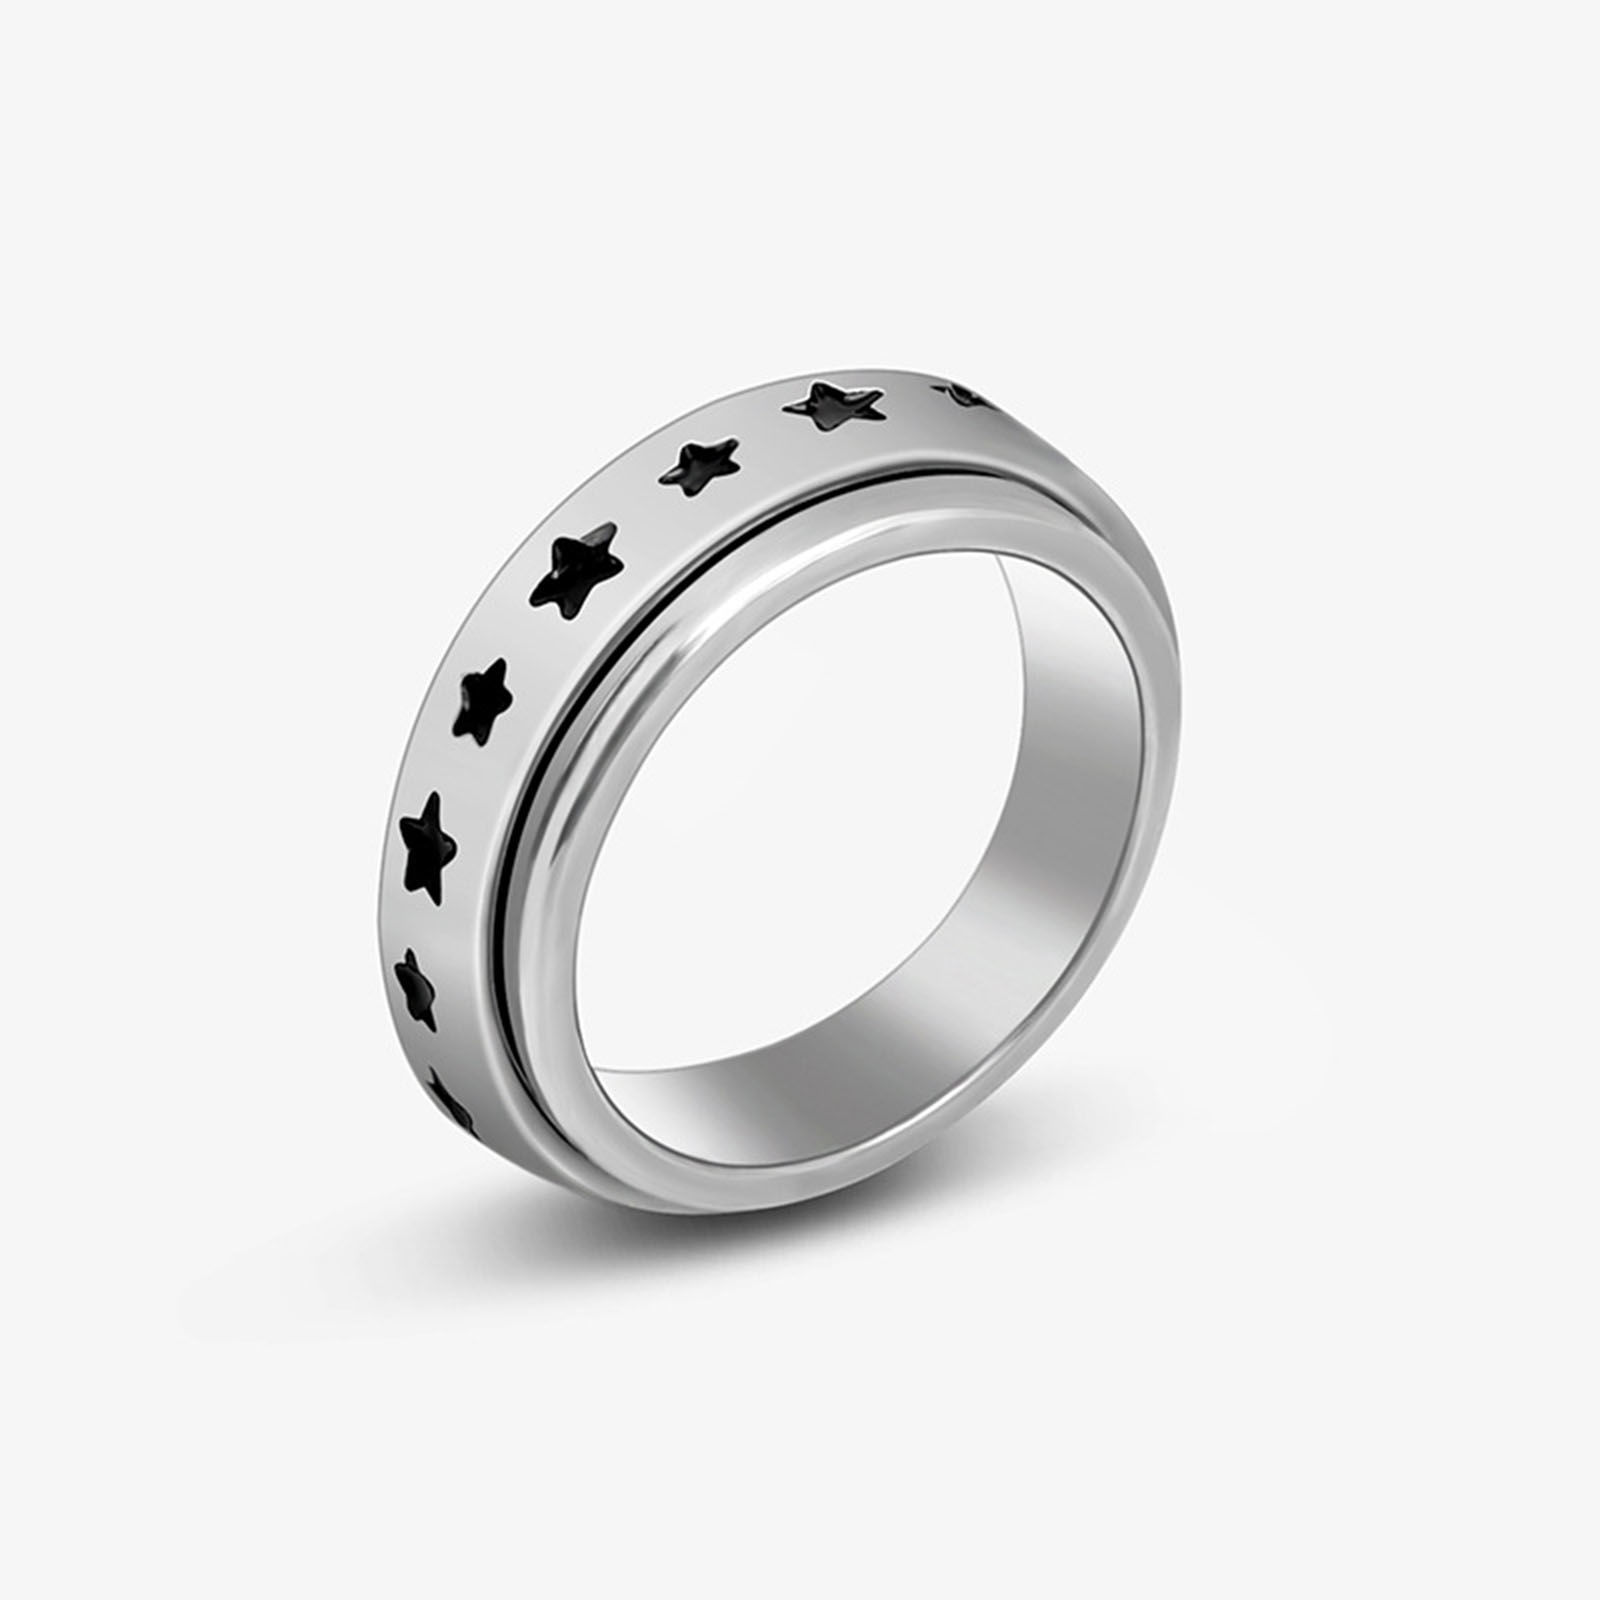 Picture of Stainless Steel Unadjustable Spinner Rings Fidget Ring Stress Relieving Anxiety Ring Silver Tone Black Rotatable Star Enamel 19.8mm(US Size 10), 1 Piece